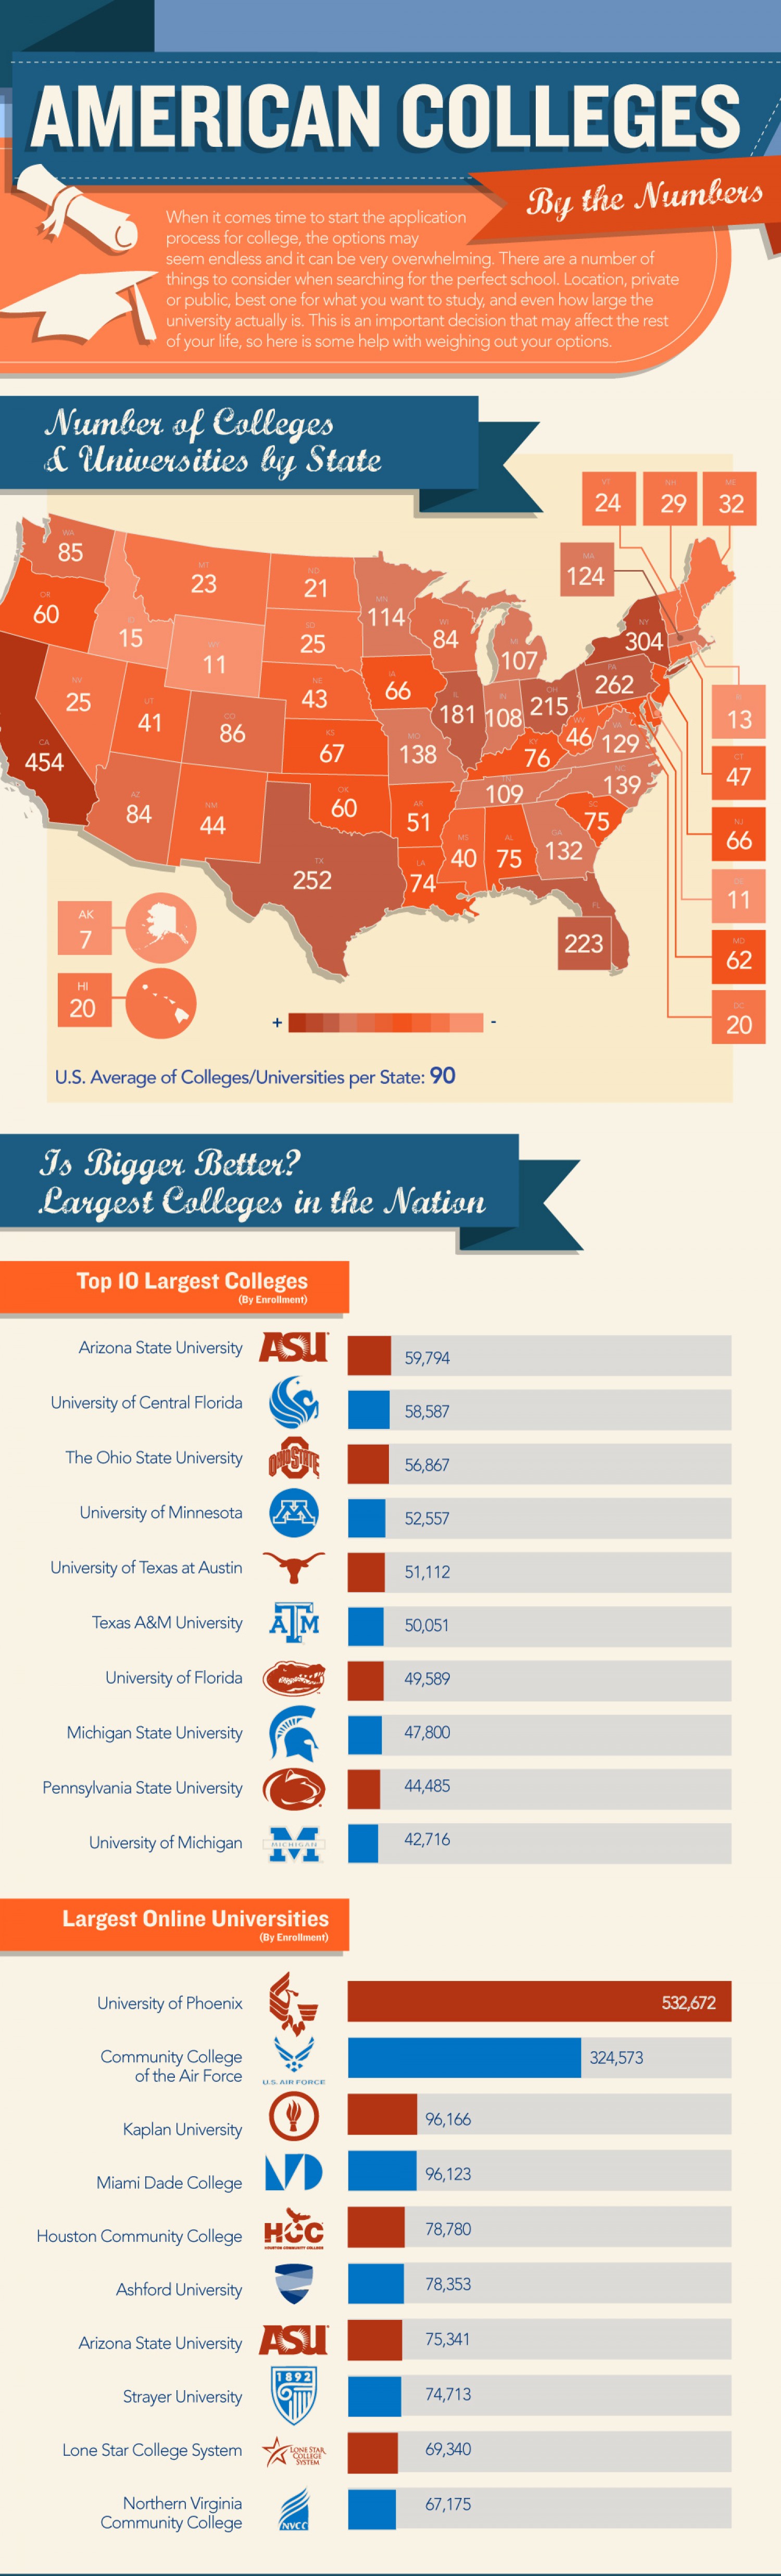 American Colleges, by the numbers